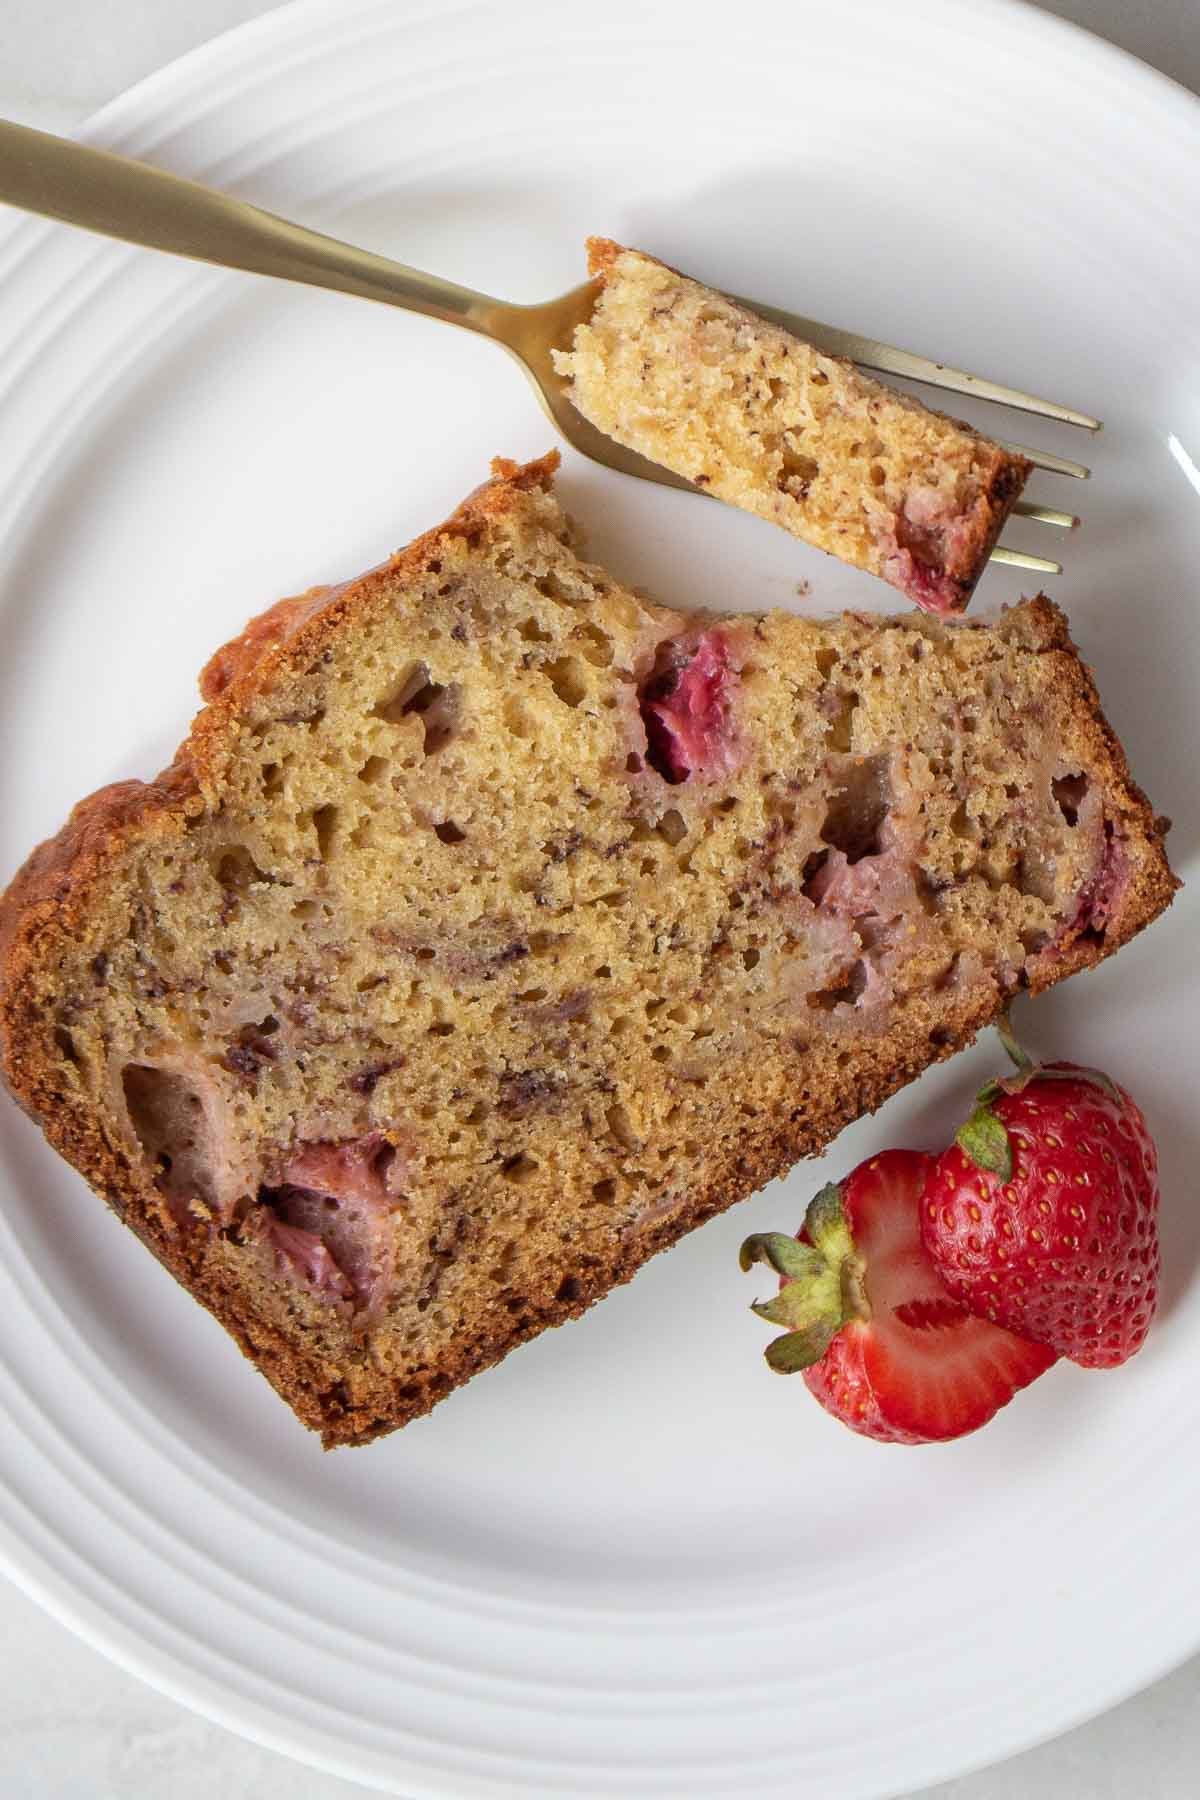 Image of a slice of strawberry banana bread on a white plate with a bite taken out with a fork.